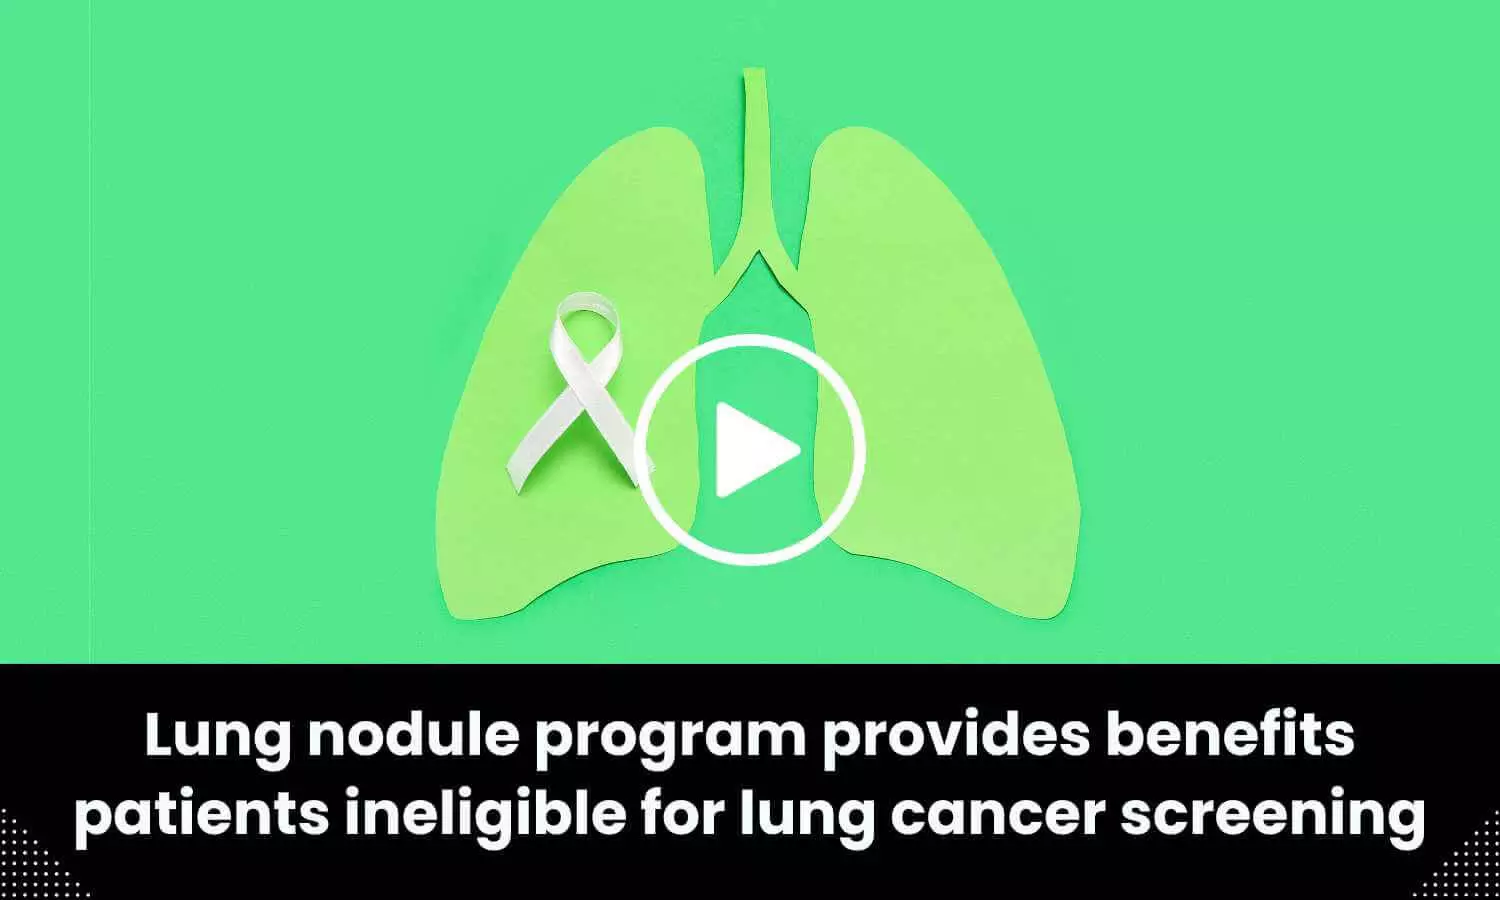 Lung nodule program provides benefits patients ineligible for lung cancer screening